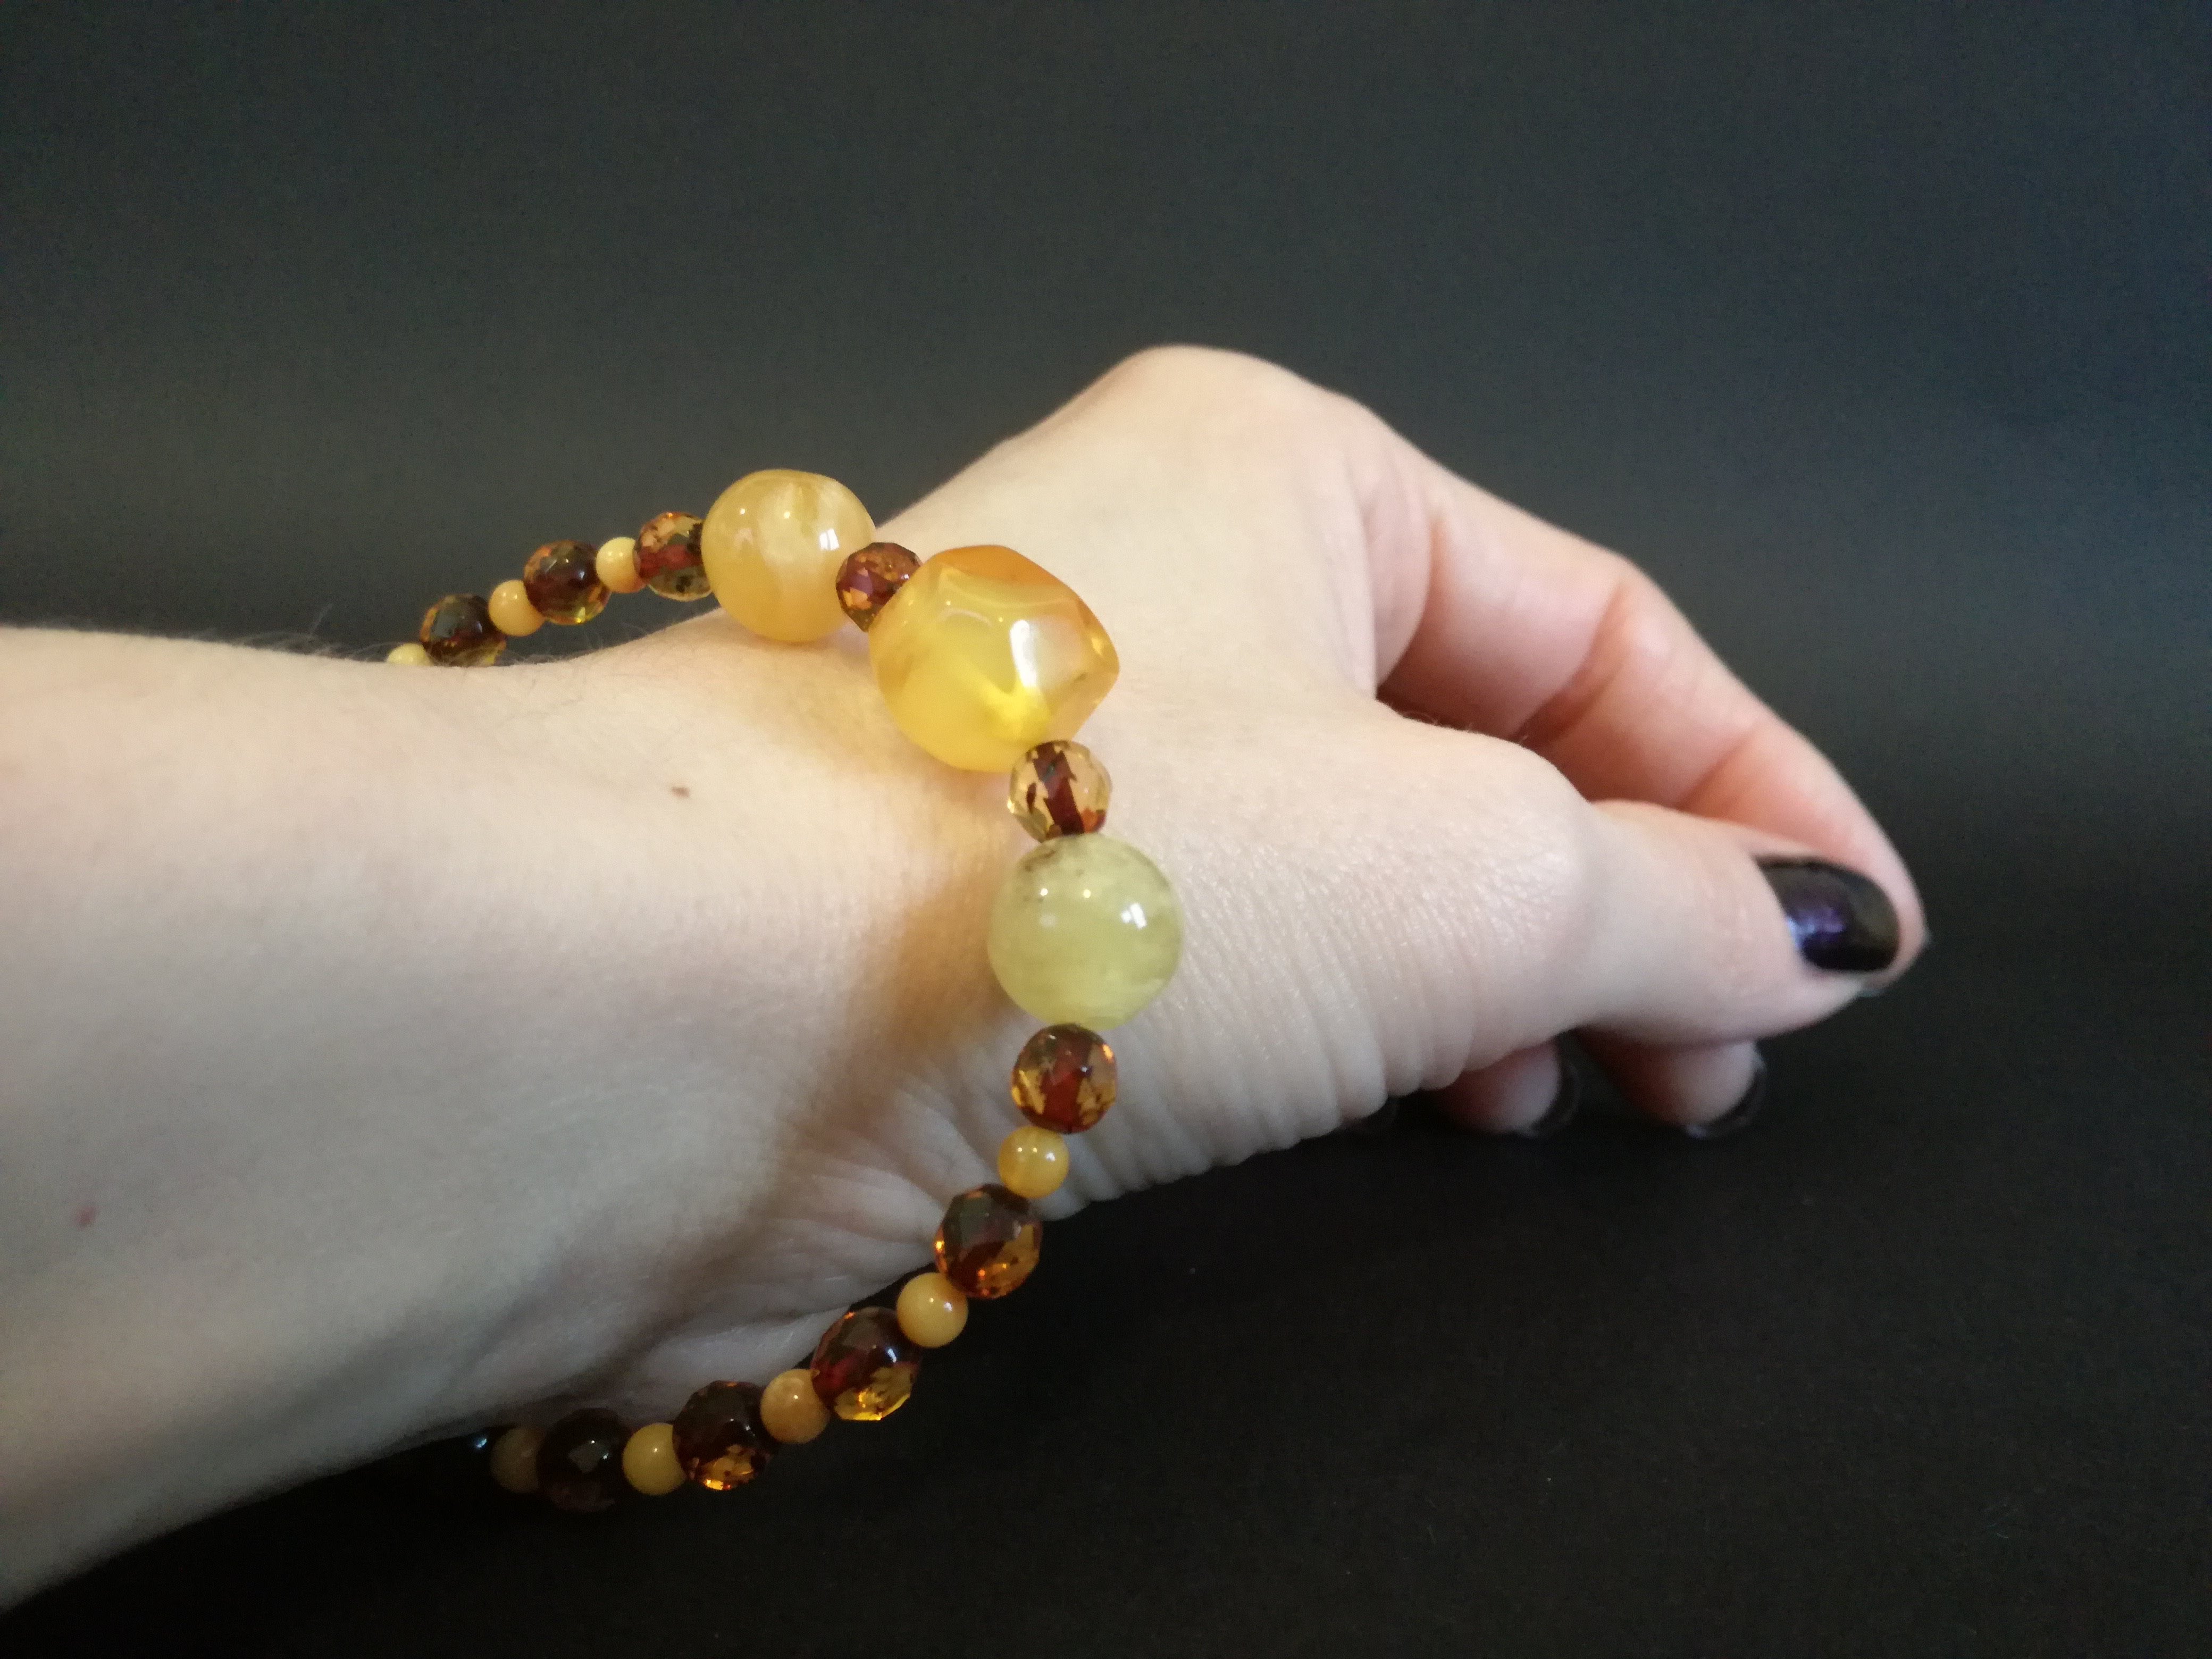 Genuine Handmade Amber Bracelet in Hand, Milky, Cognac, Small Size, faceted, Small Round Beads, Healing properties, For Her, Nursing Mums